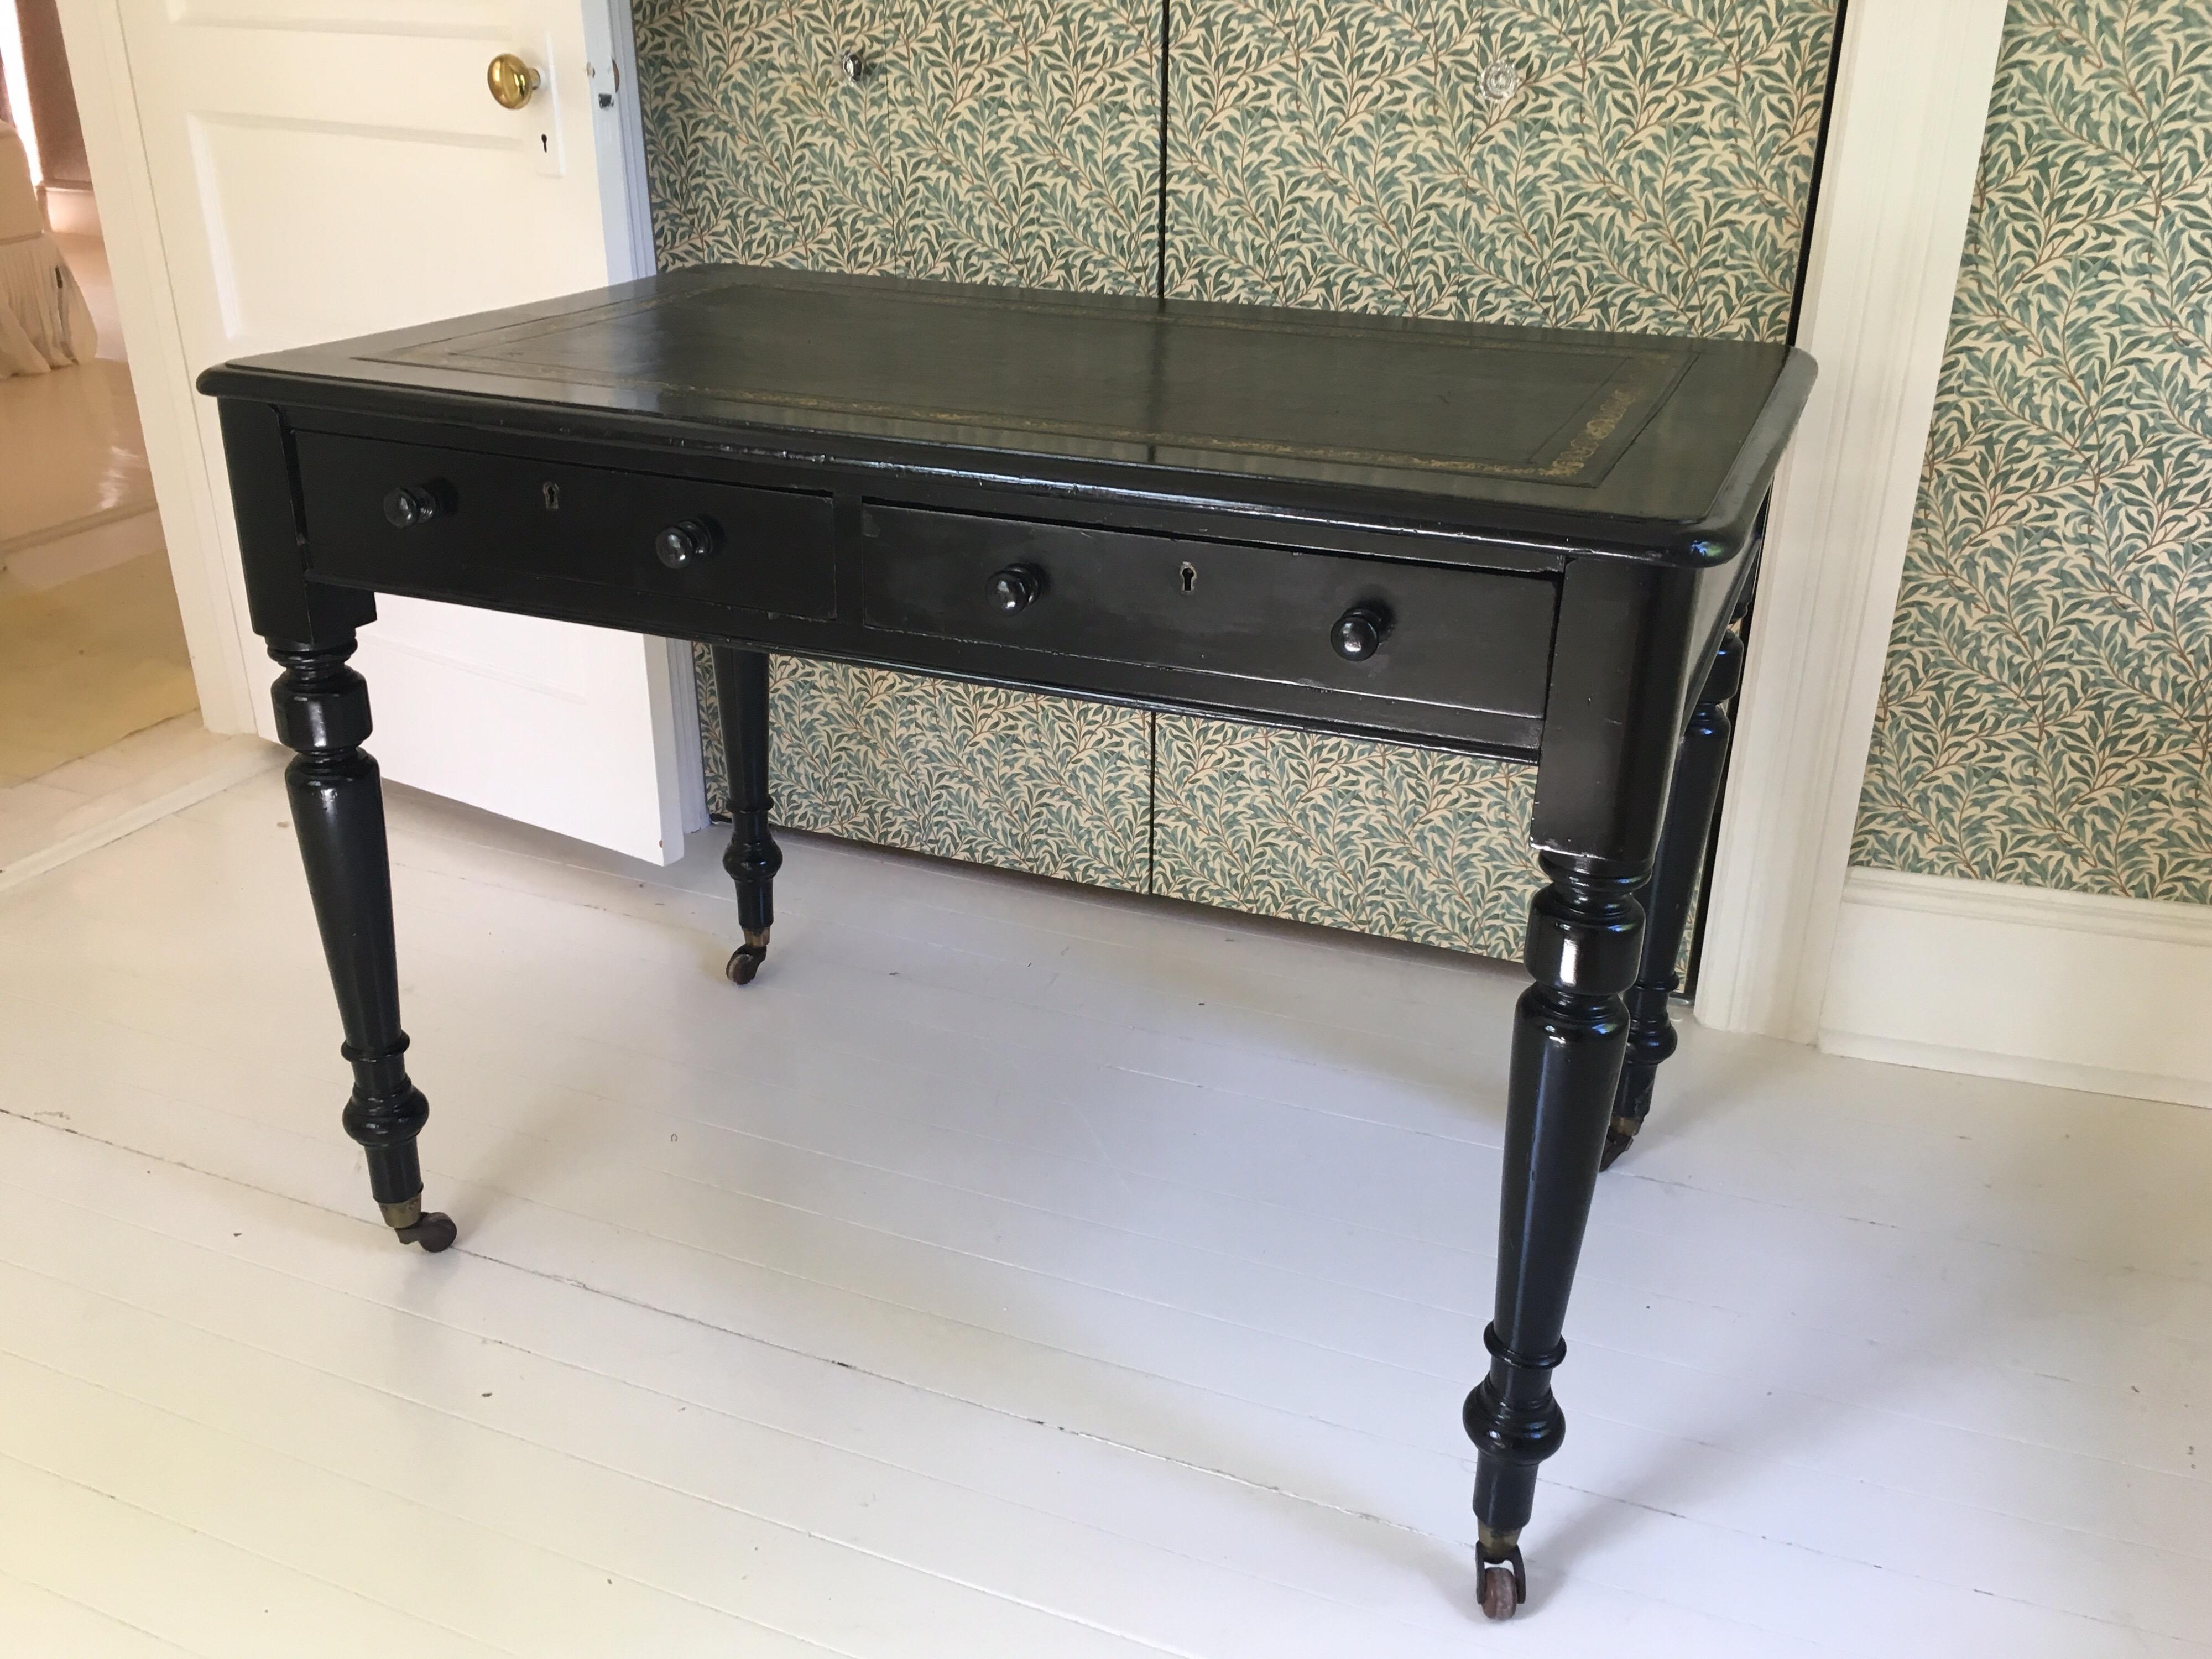 Vintage black lacquered desk with leather top on turned wooden legs and brass casters. Two center drawers on one side.
General wear to top and finish.
Measures: 40.75